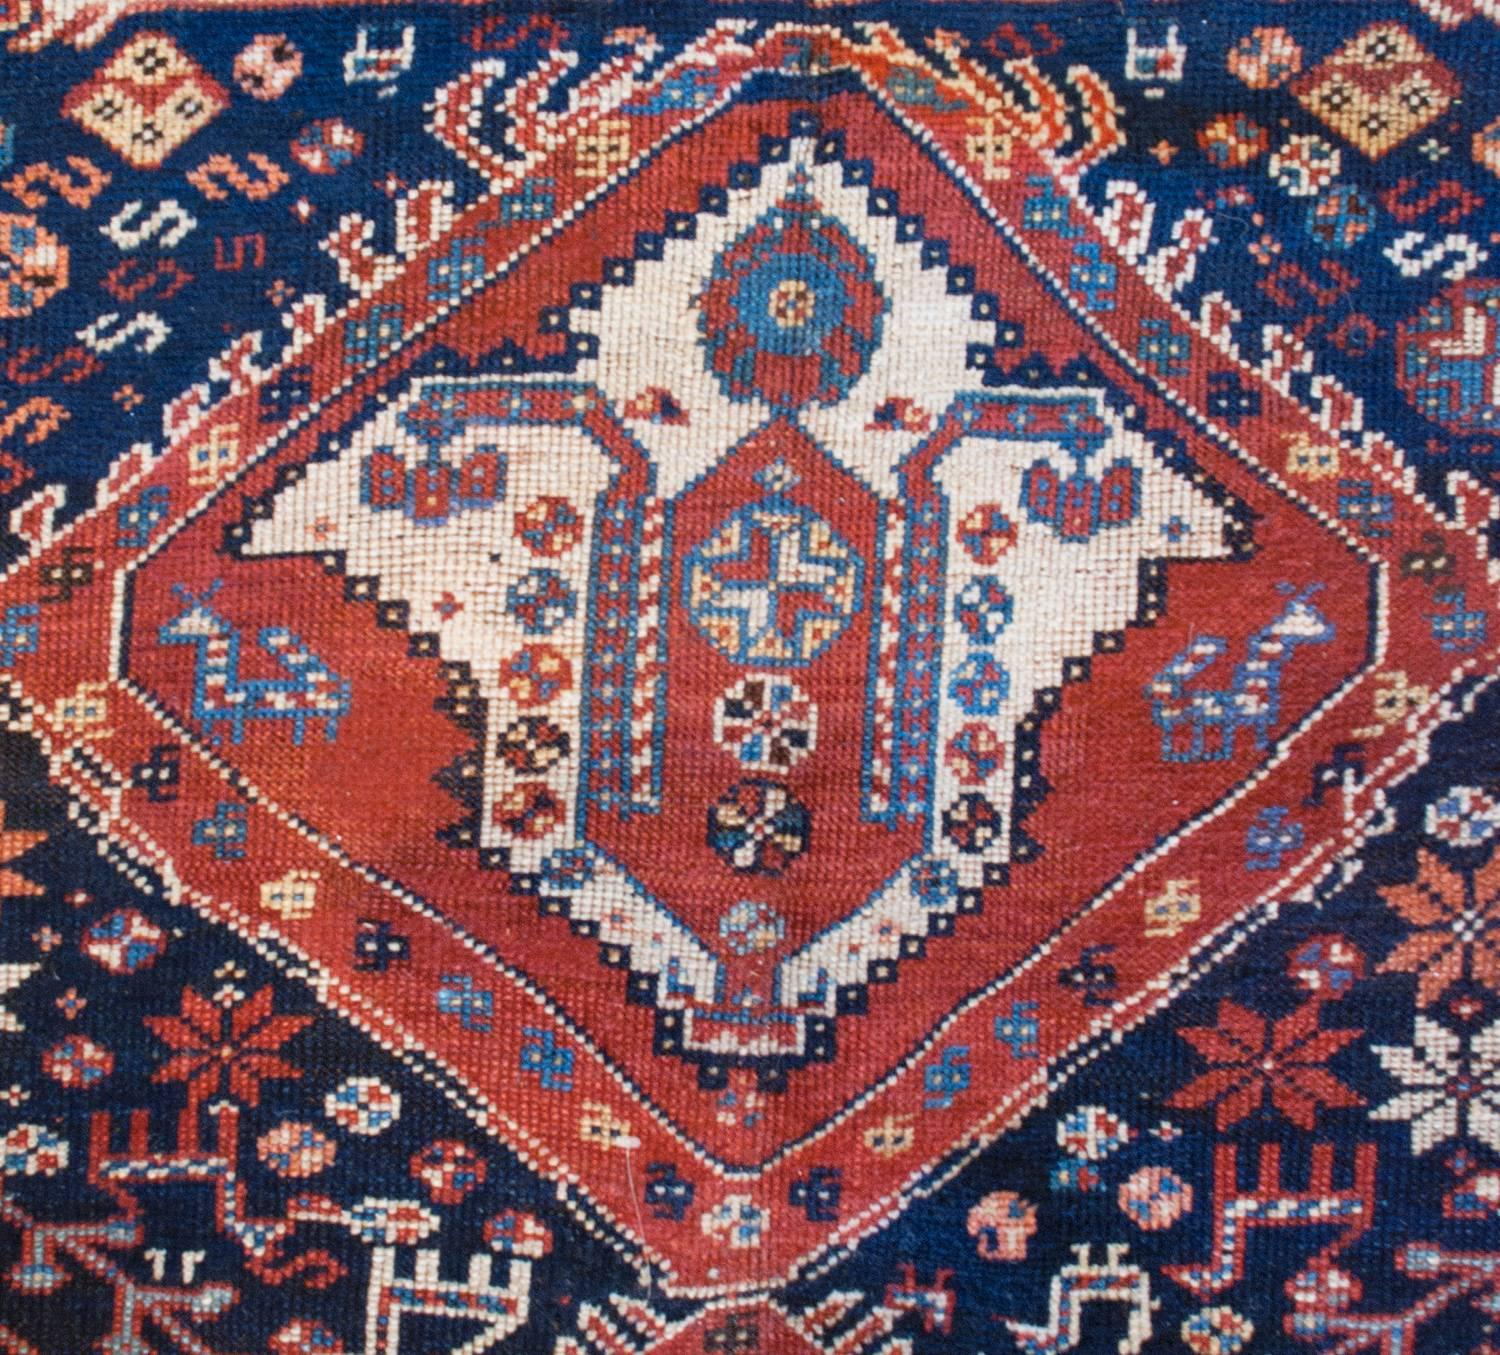 An incredible late 19th century Persian Ghashghaei rug with two large crimson and indigo diamond medallions amidst a fantastic field of flowering bushes, trees-of-life, and myriad animals including deer, birds and goats, all on a dark indigo